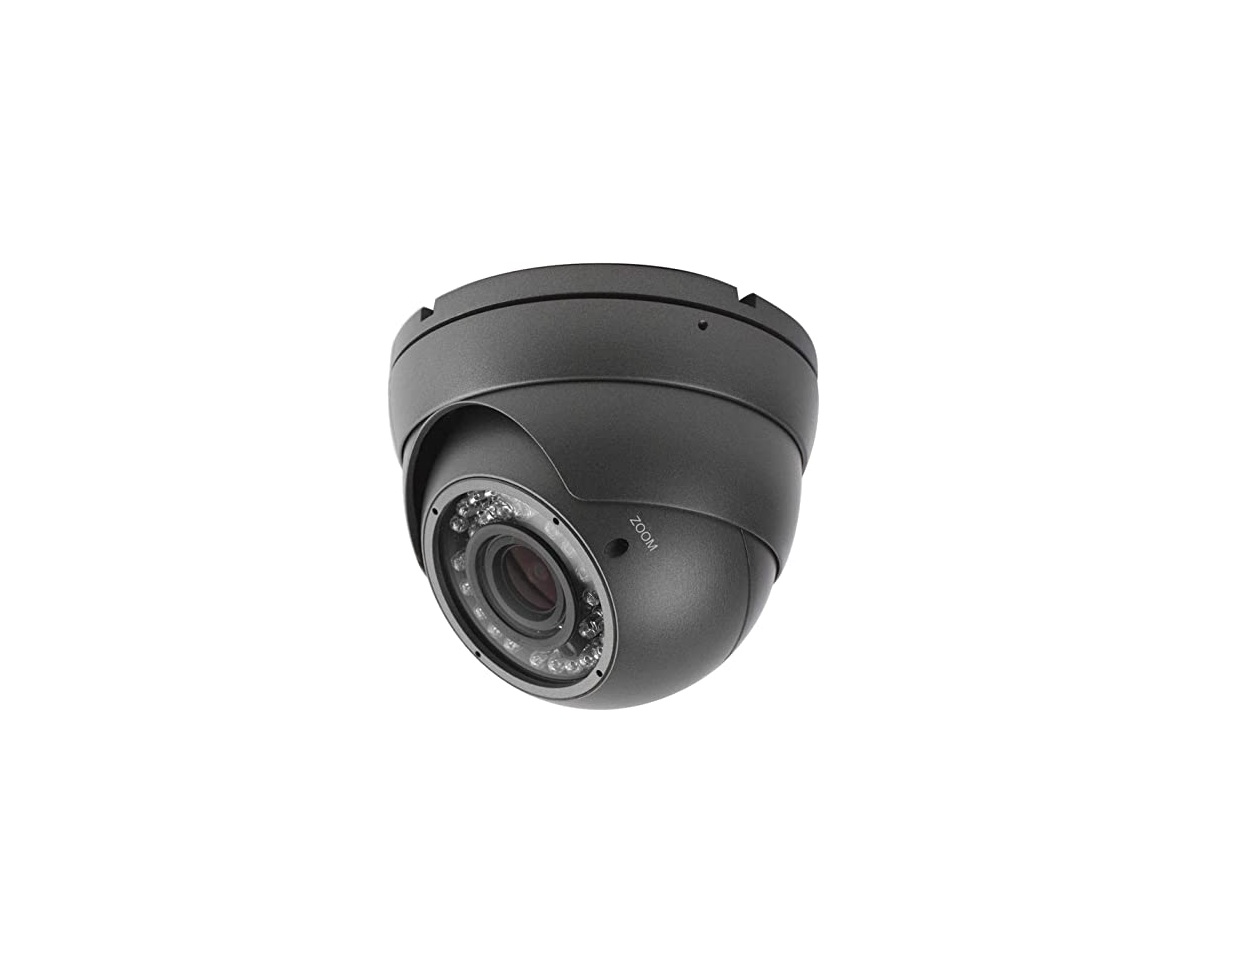 WIZARD 4-1 4K Dome Camera with fix lens Instructions